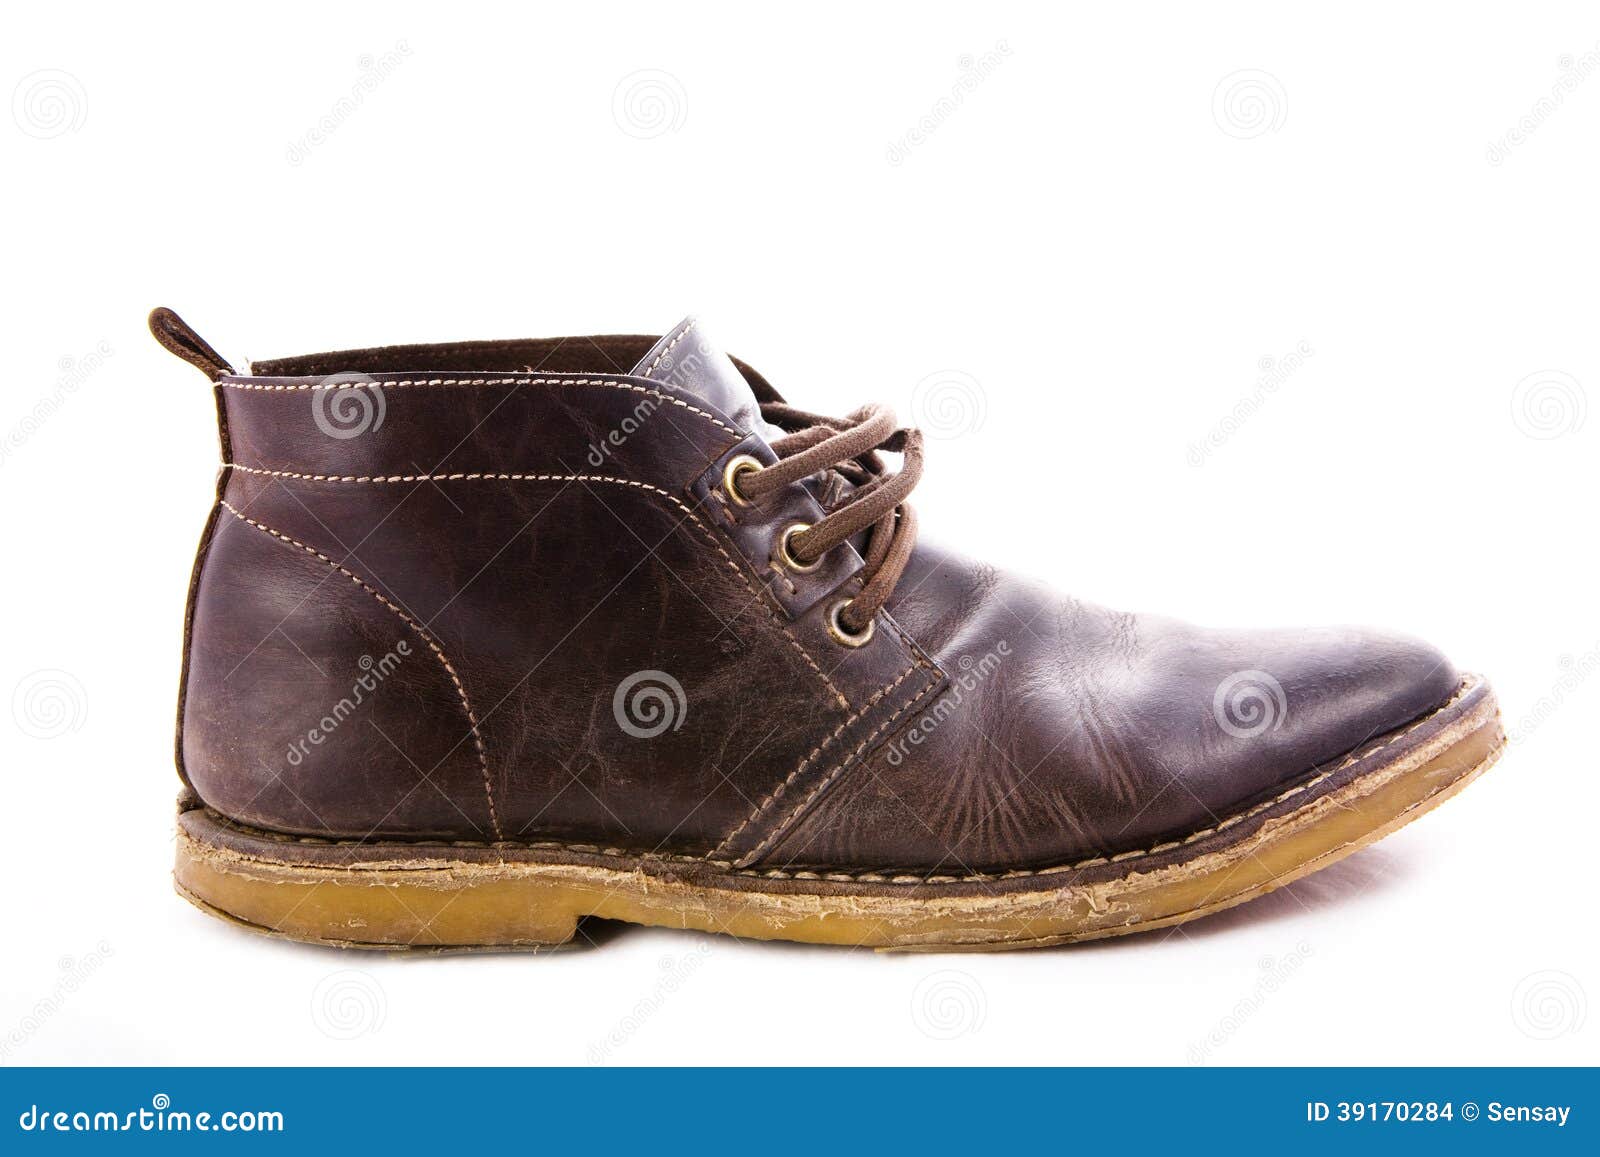 Old fashioned brown boots stock photo. Image of industry - 39170284